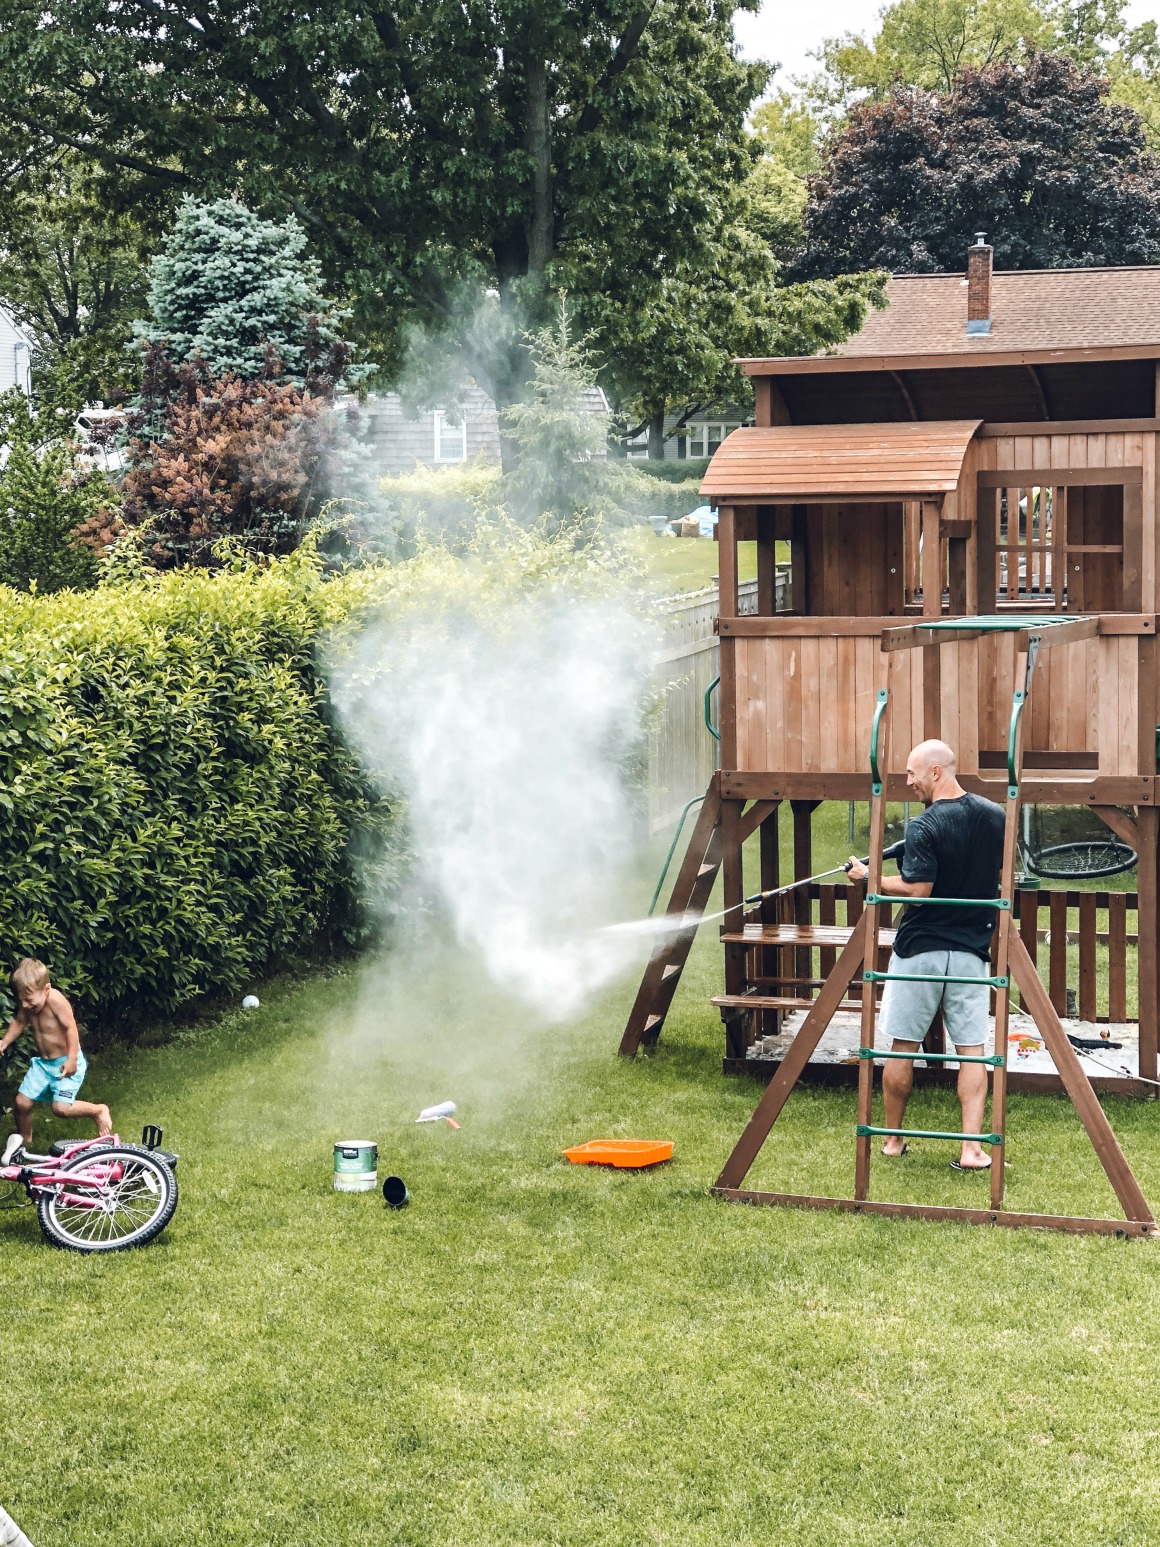 Painted White Playset